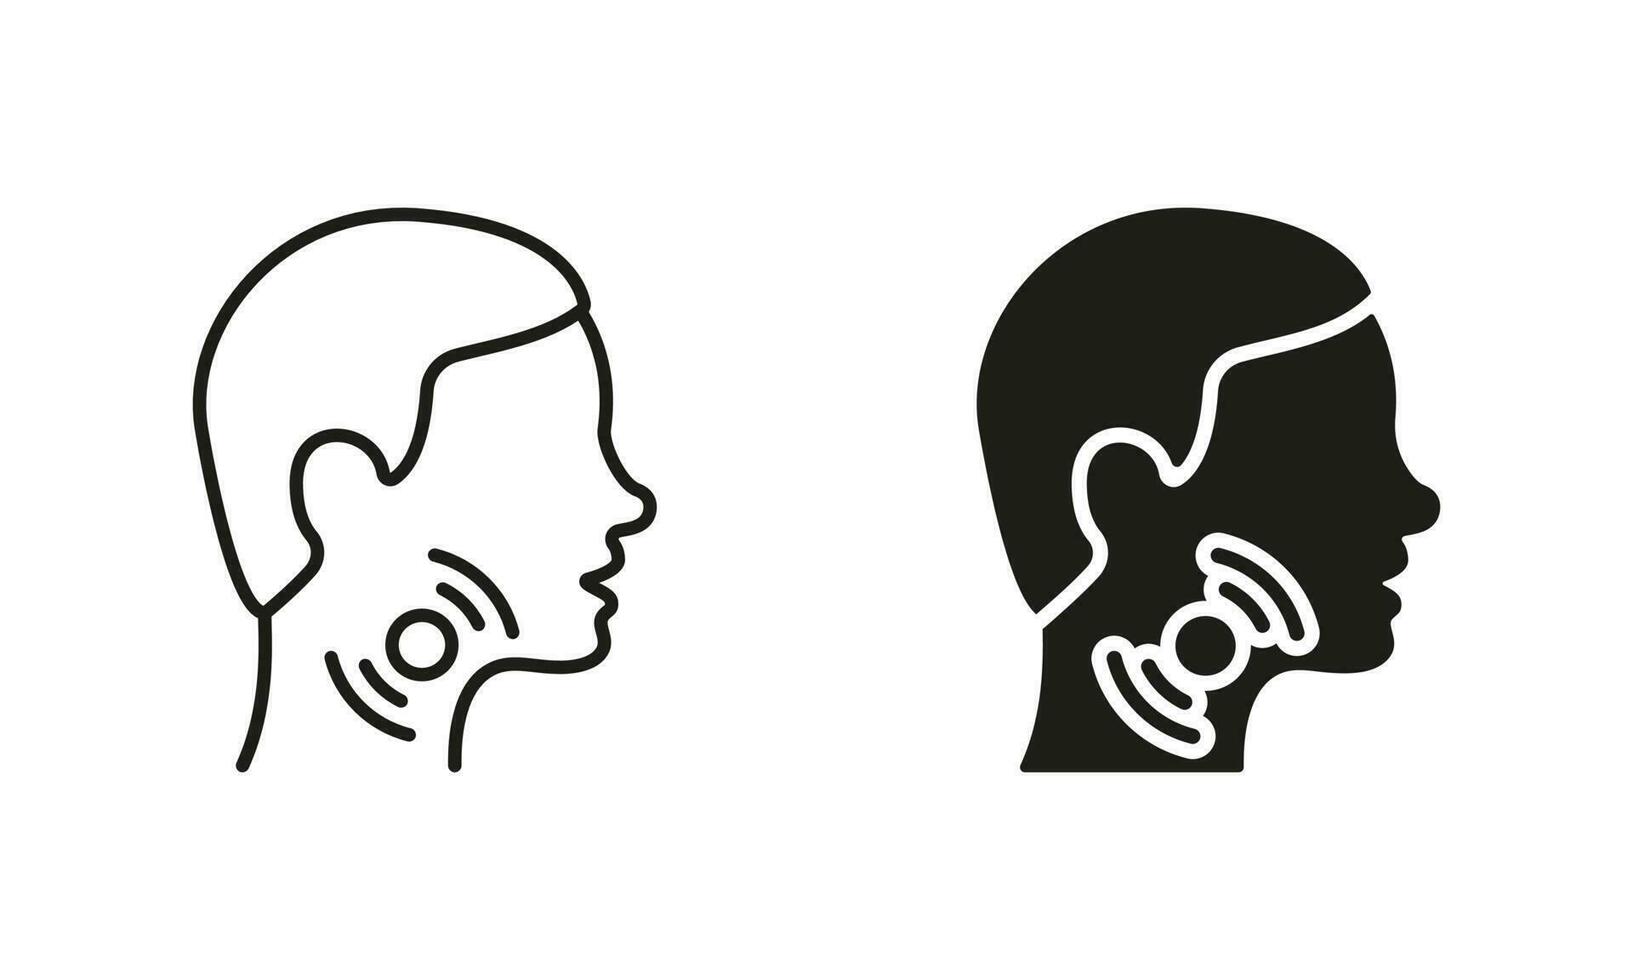 Sore Throat Line and Silhouette Icon Set. Painful Sore Throat Symbol Collection. Male Head with Symptoms of Angina, Flu, Cold Pictogram. Isolated Vector illustration.